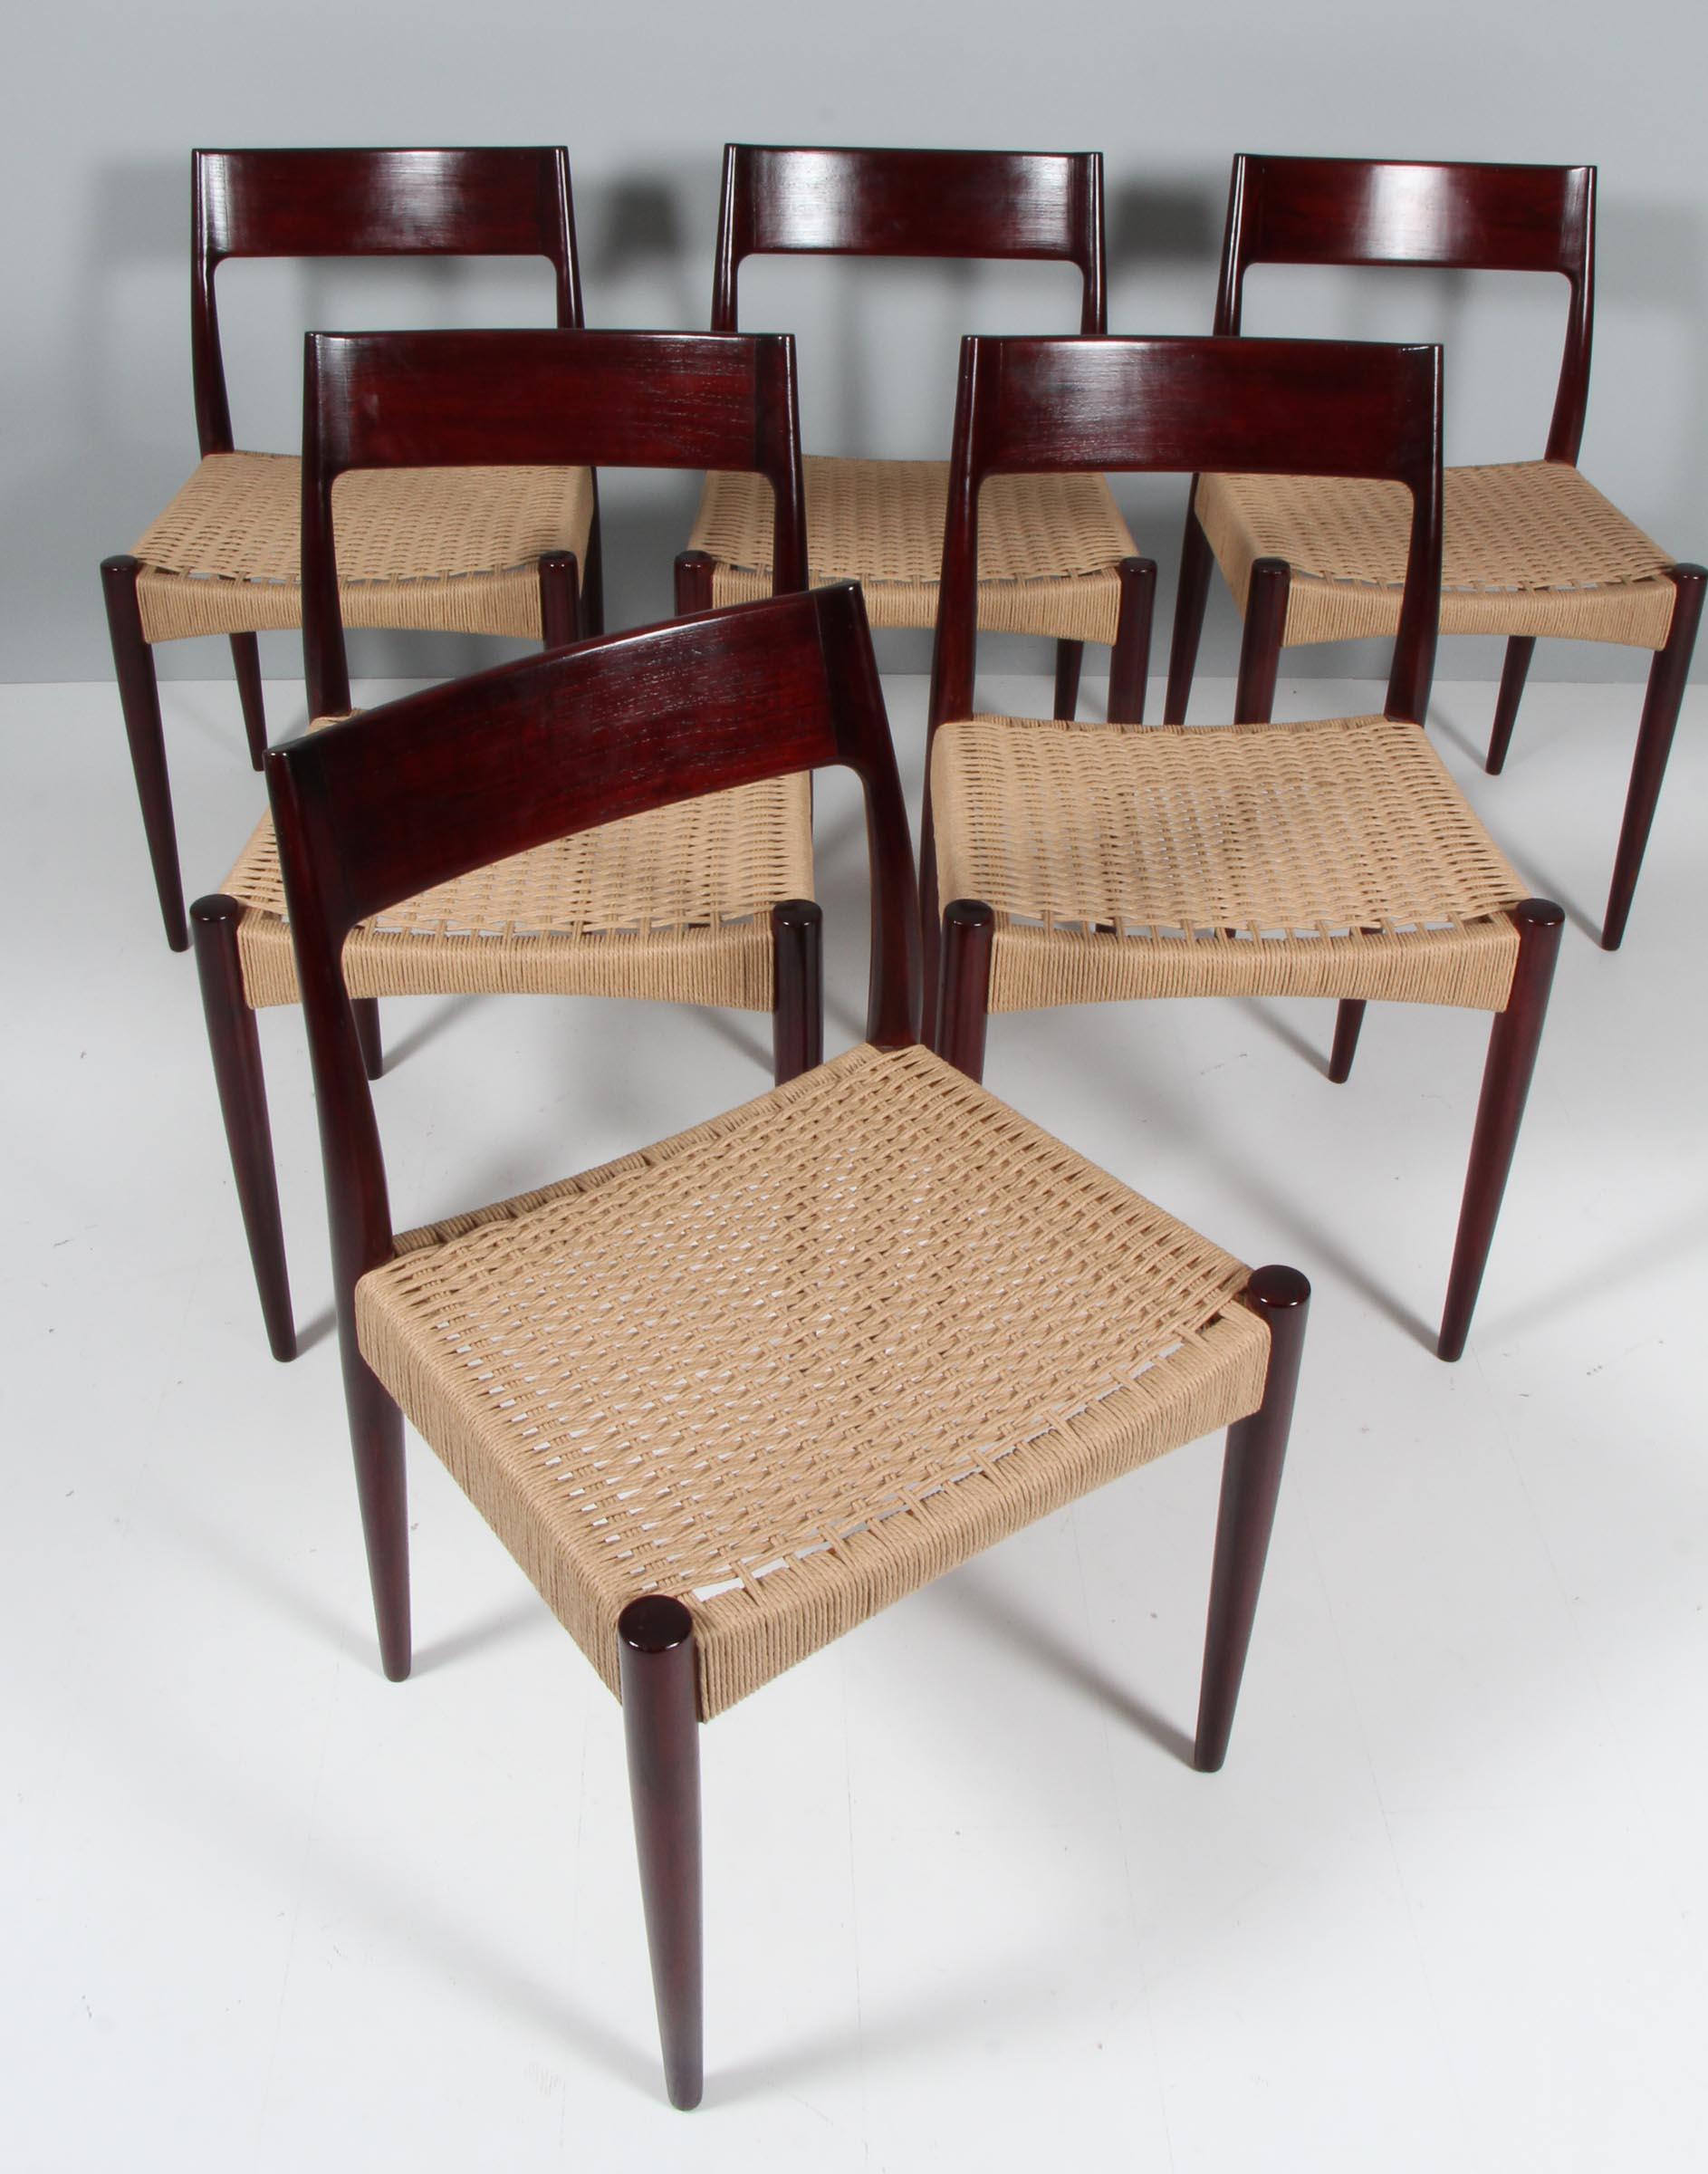 Arne Hovmand-Olsen. Set of dining chairs in mahogany.

New weaved seats in papercord.

Made by Mogens Kold.